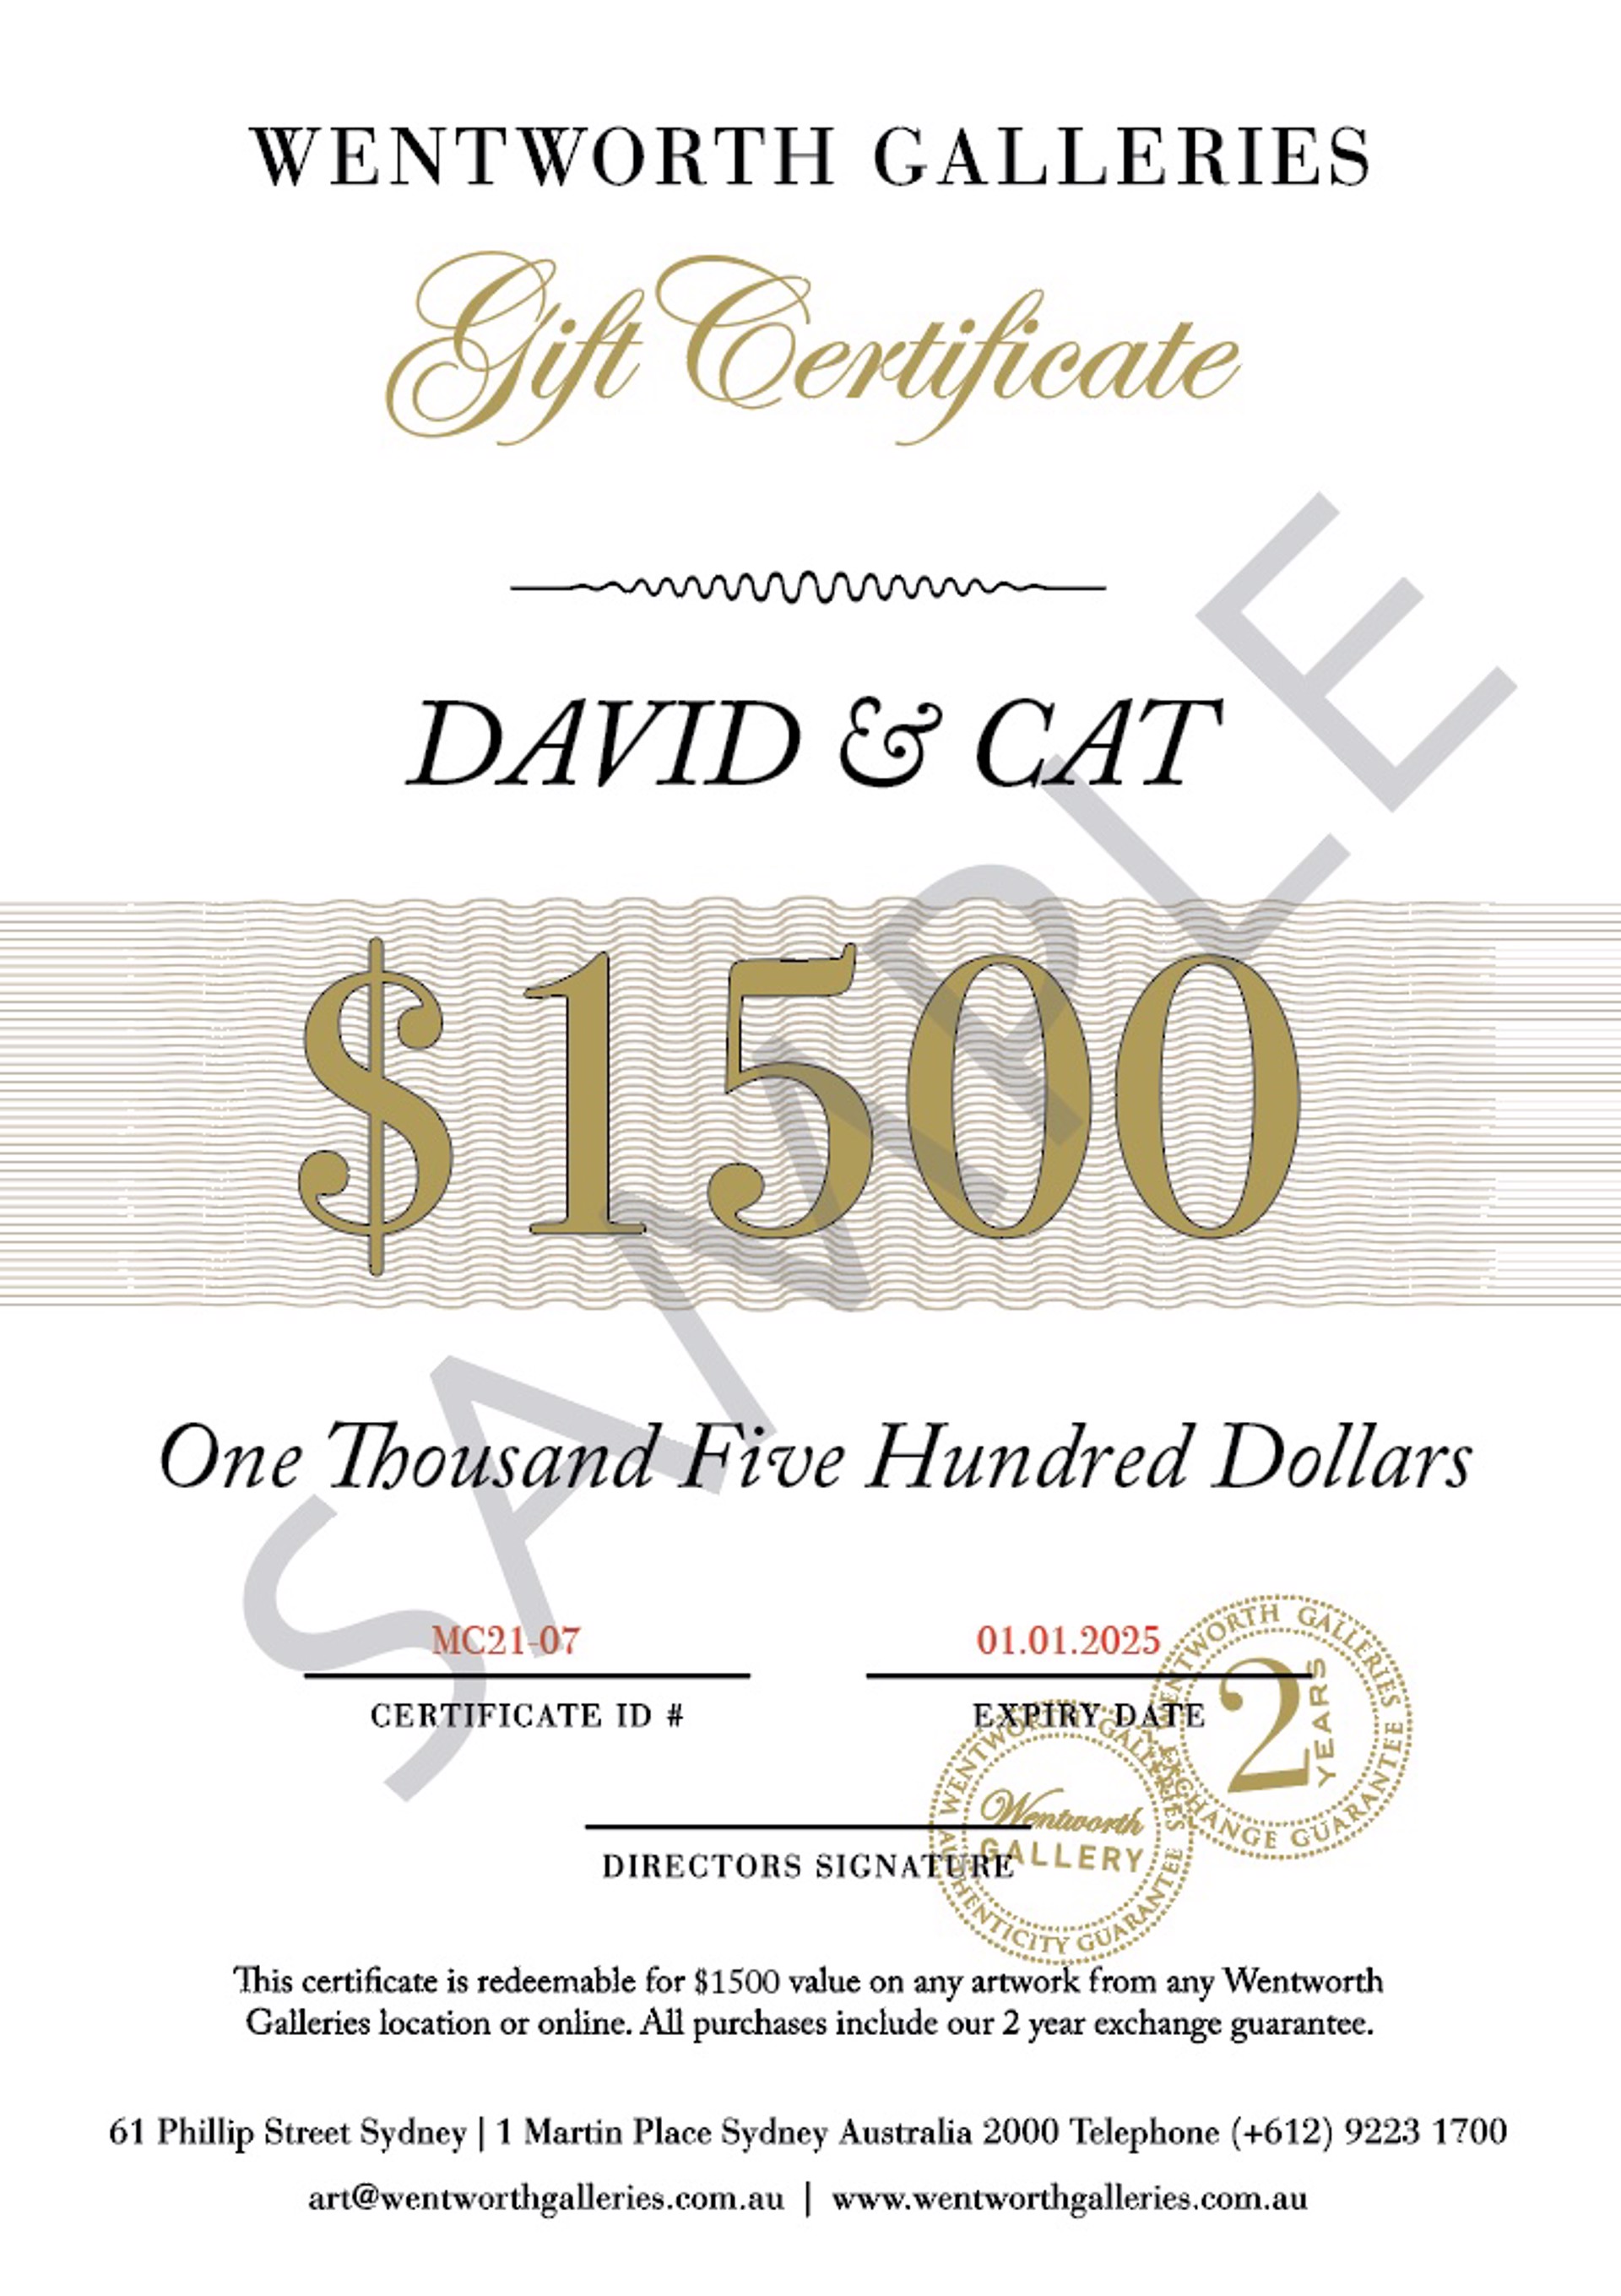 Gift Certificate - One Thousand Five Hundred Dollars $1500 (David & Cat)